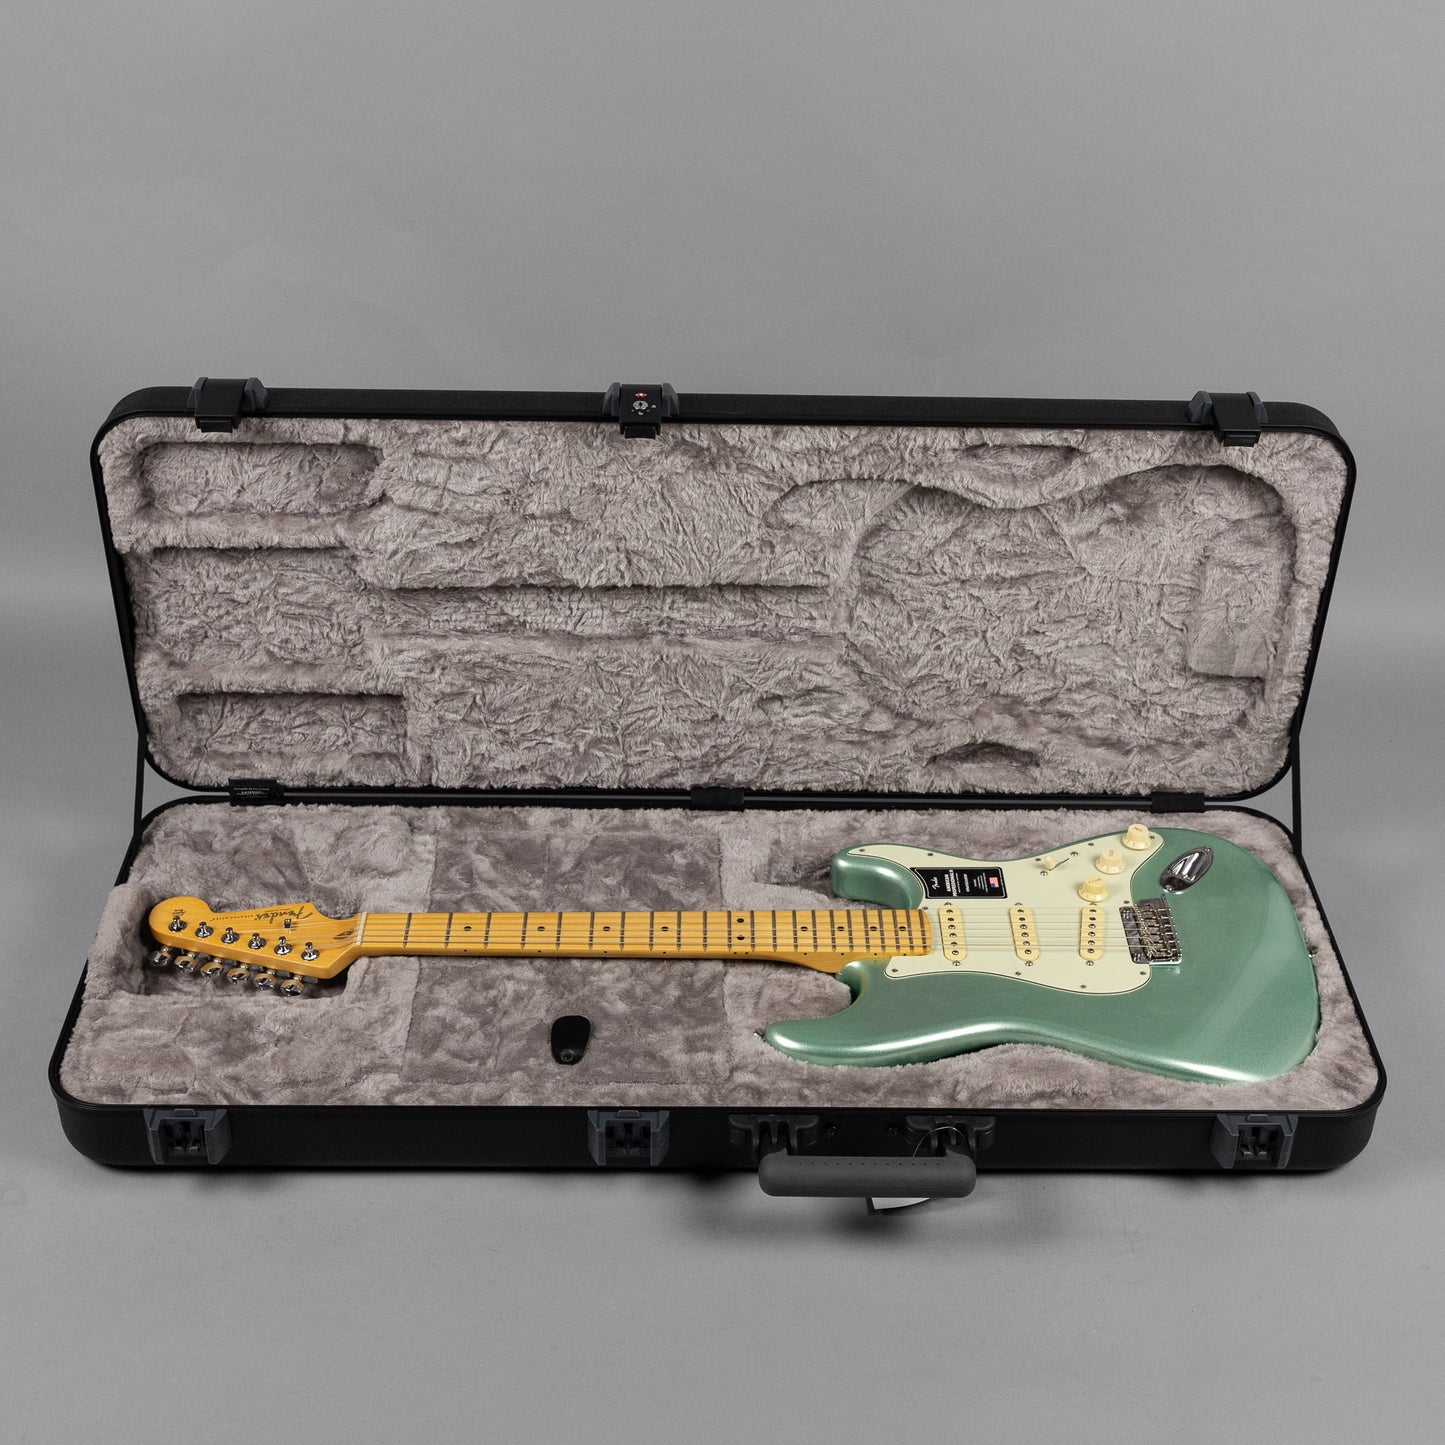 Fender American Professional II Stratocaster in Mystic Surf Green (US23075100)